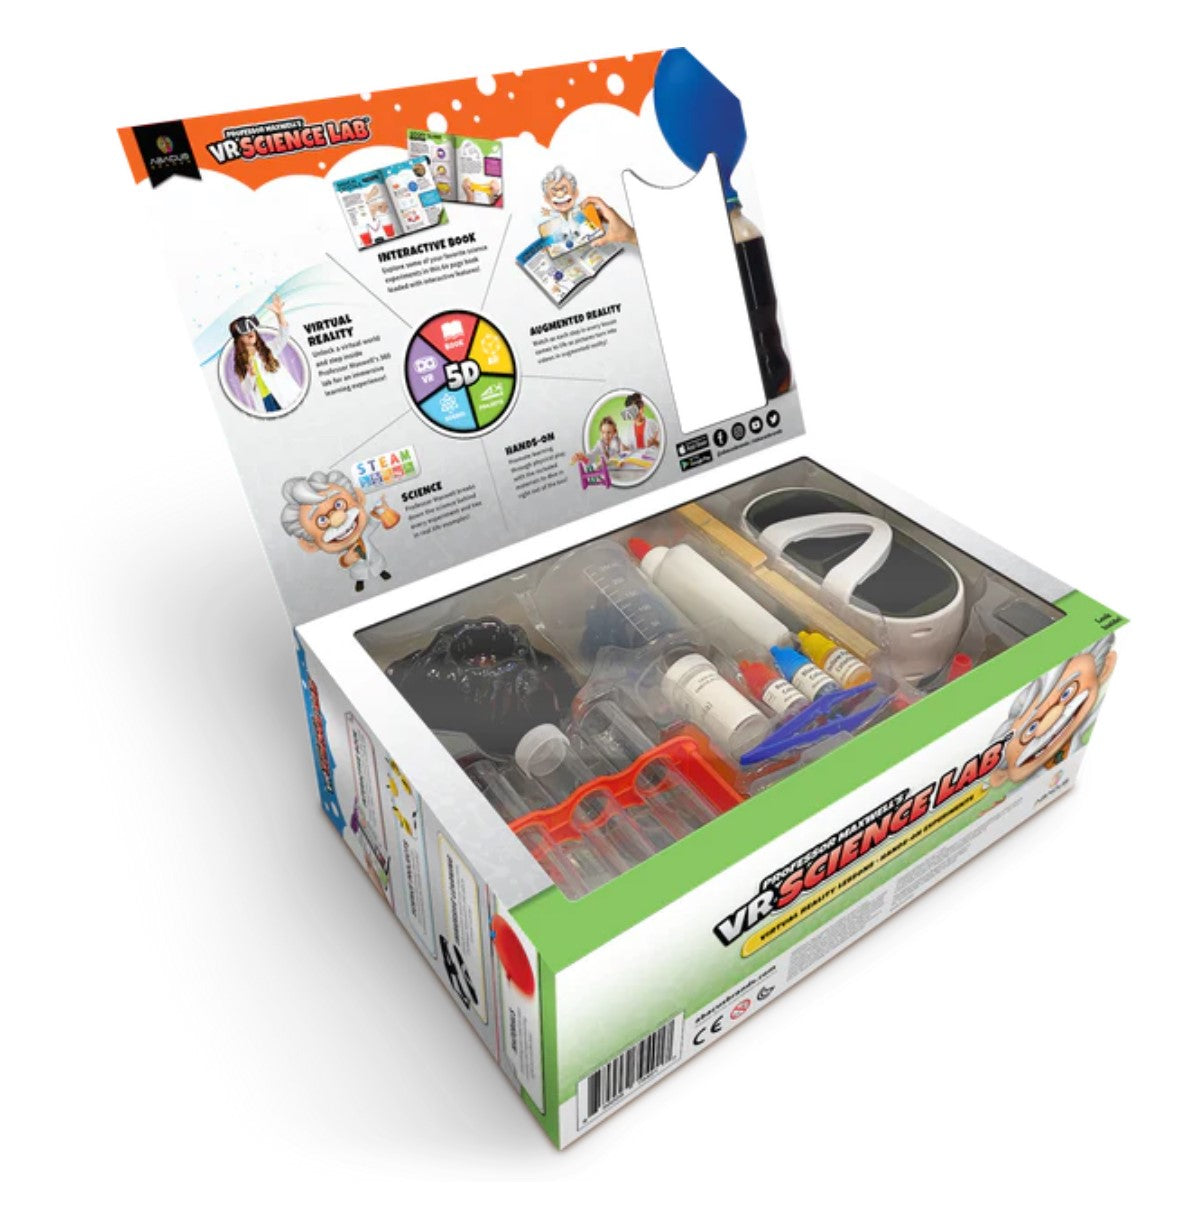 Abacus Brands VR Science Lab Professor Maxwell's Science Virtual Reality Kit – Full Version